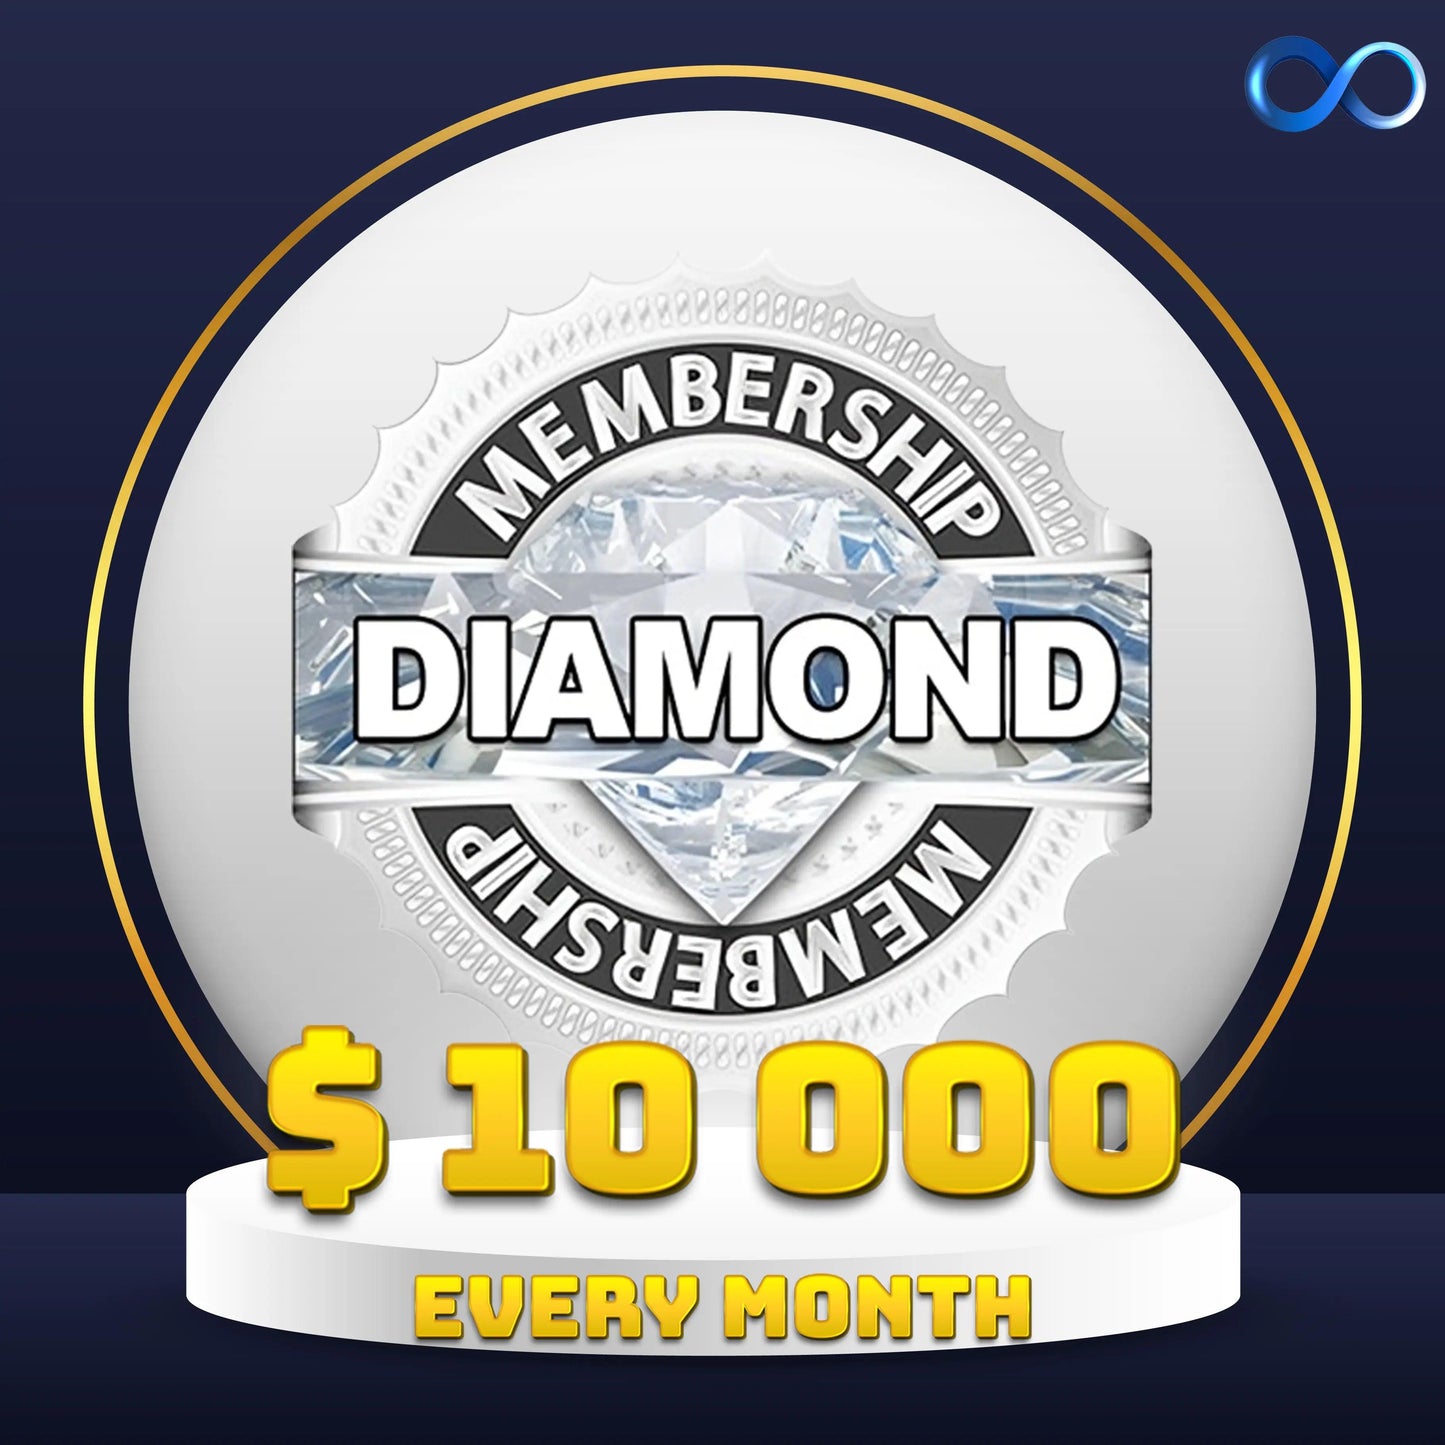 Diamond Investment Package Monthly revenue: $ 10 000 every month / for life time